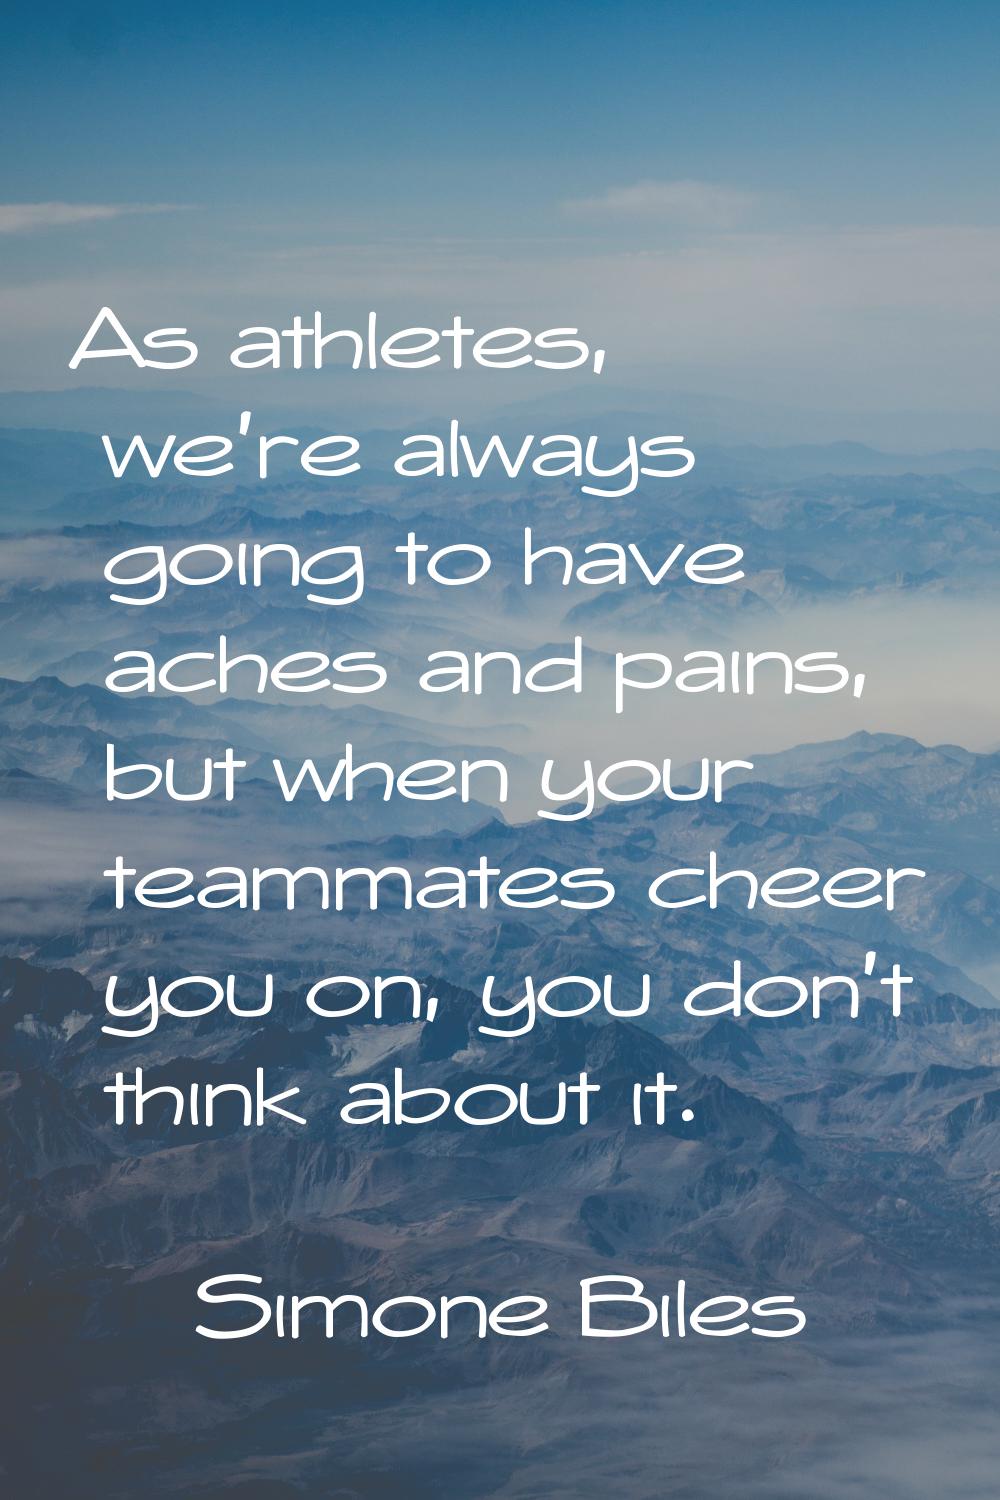 As athletes, we're always going to have aches and pains, but when your teammates cheer you on, you 